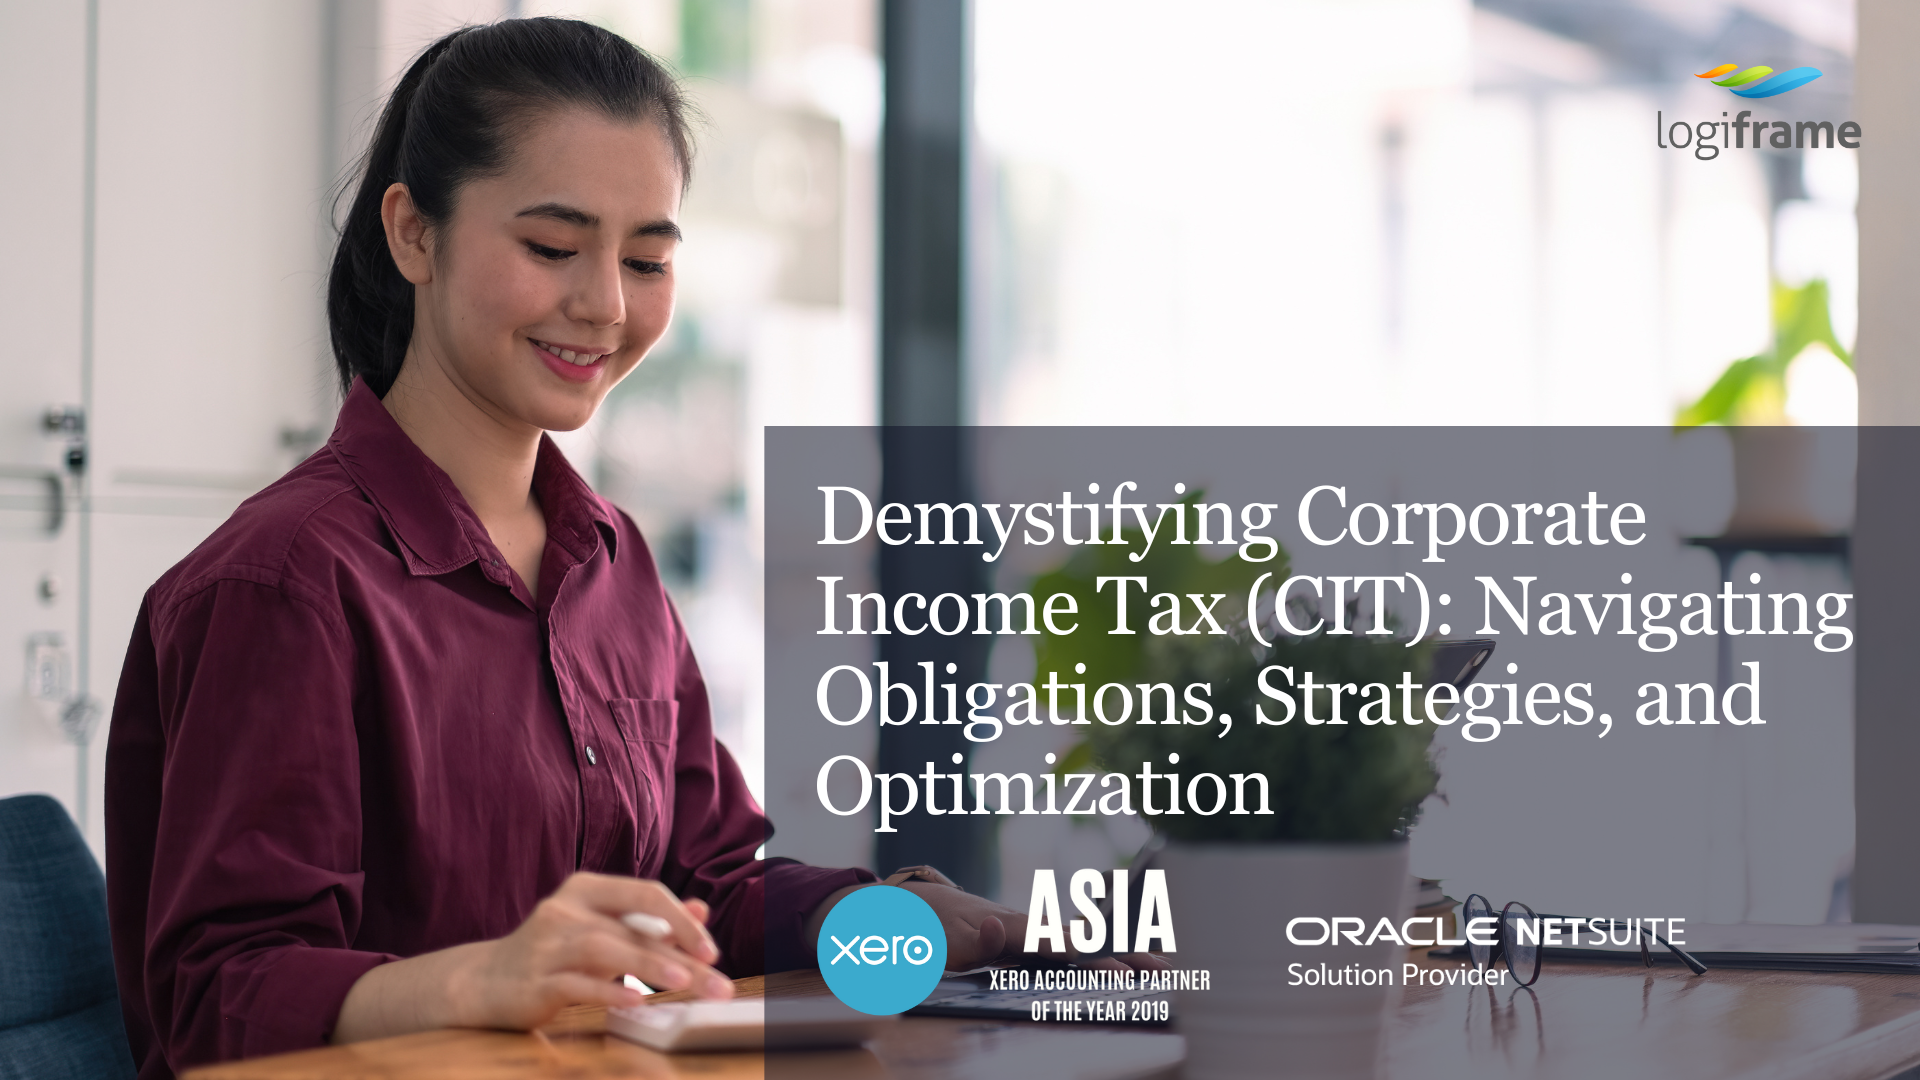 Demystifying Corporate Income Tax (CIT) Navigating Obligations, Strategies, and Optimization